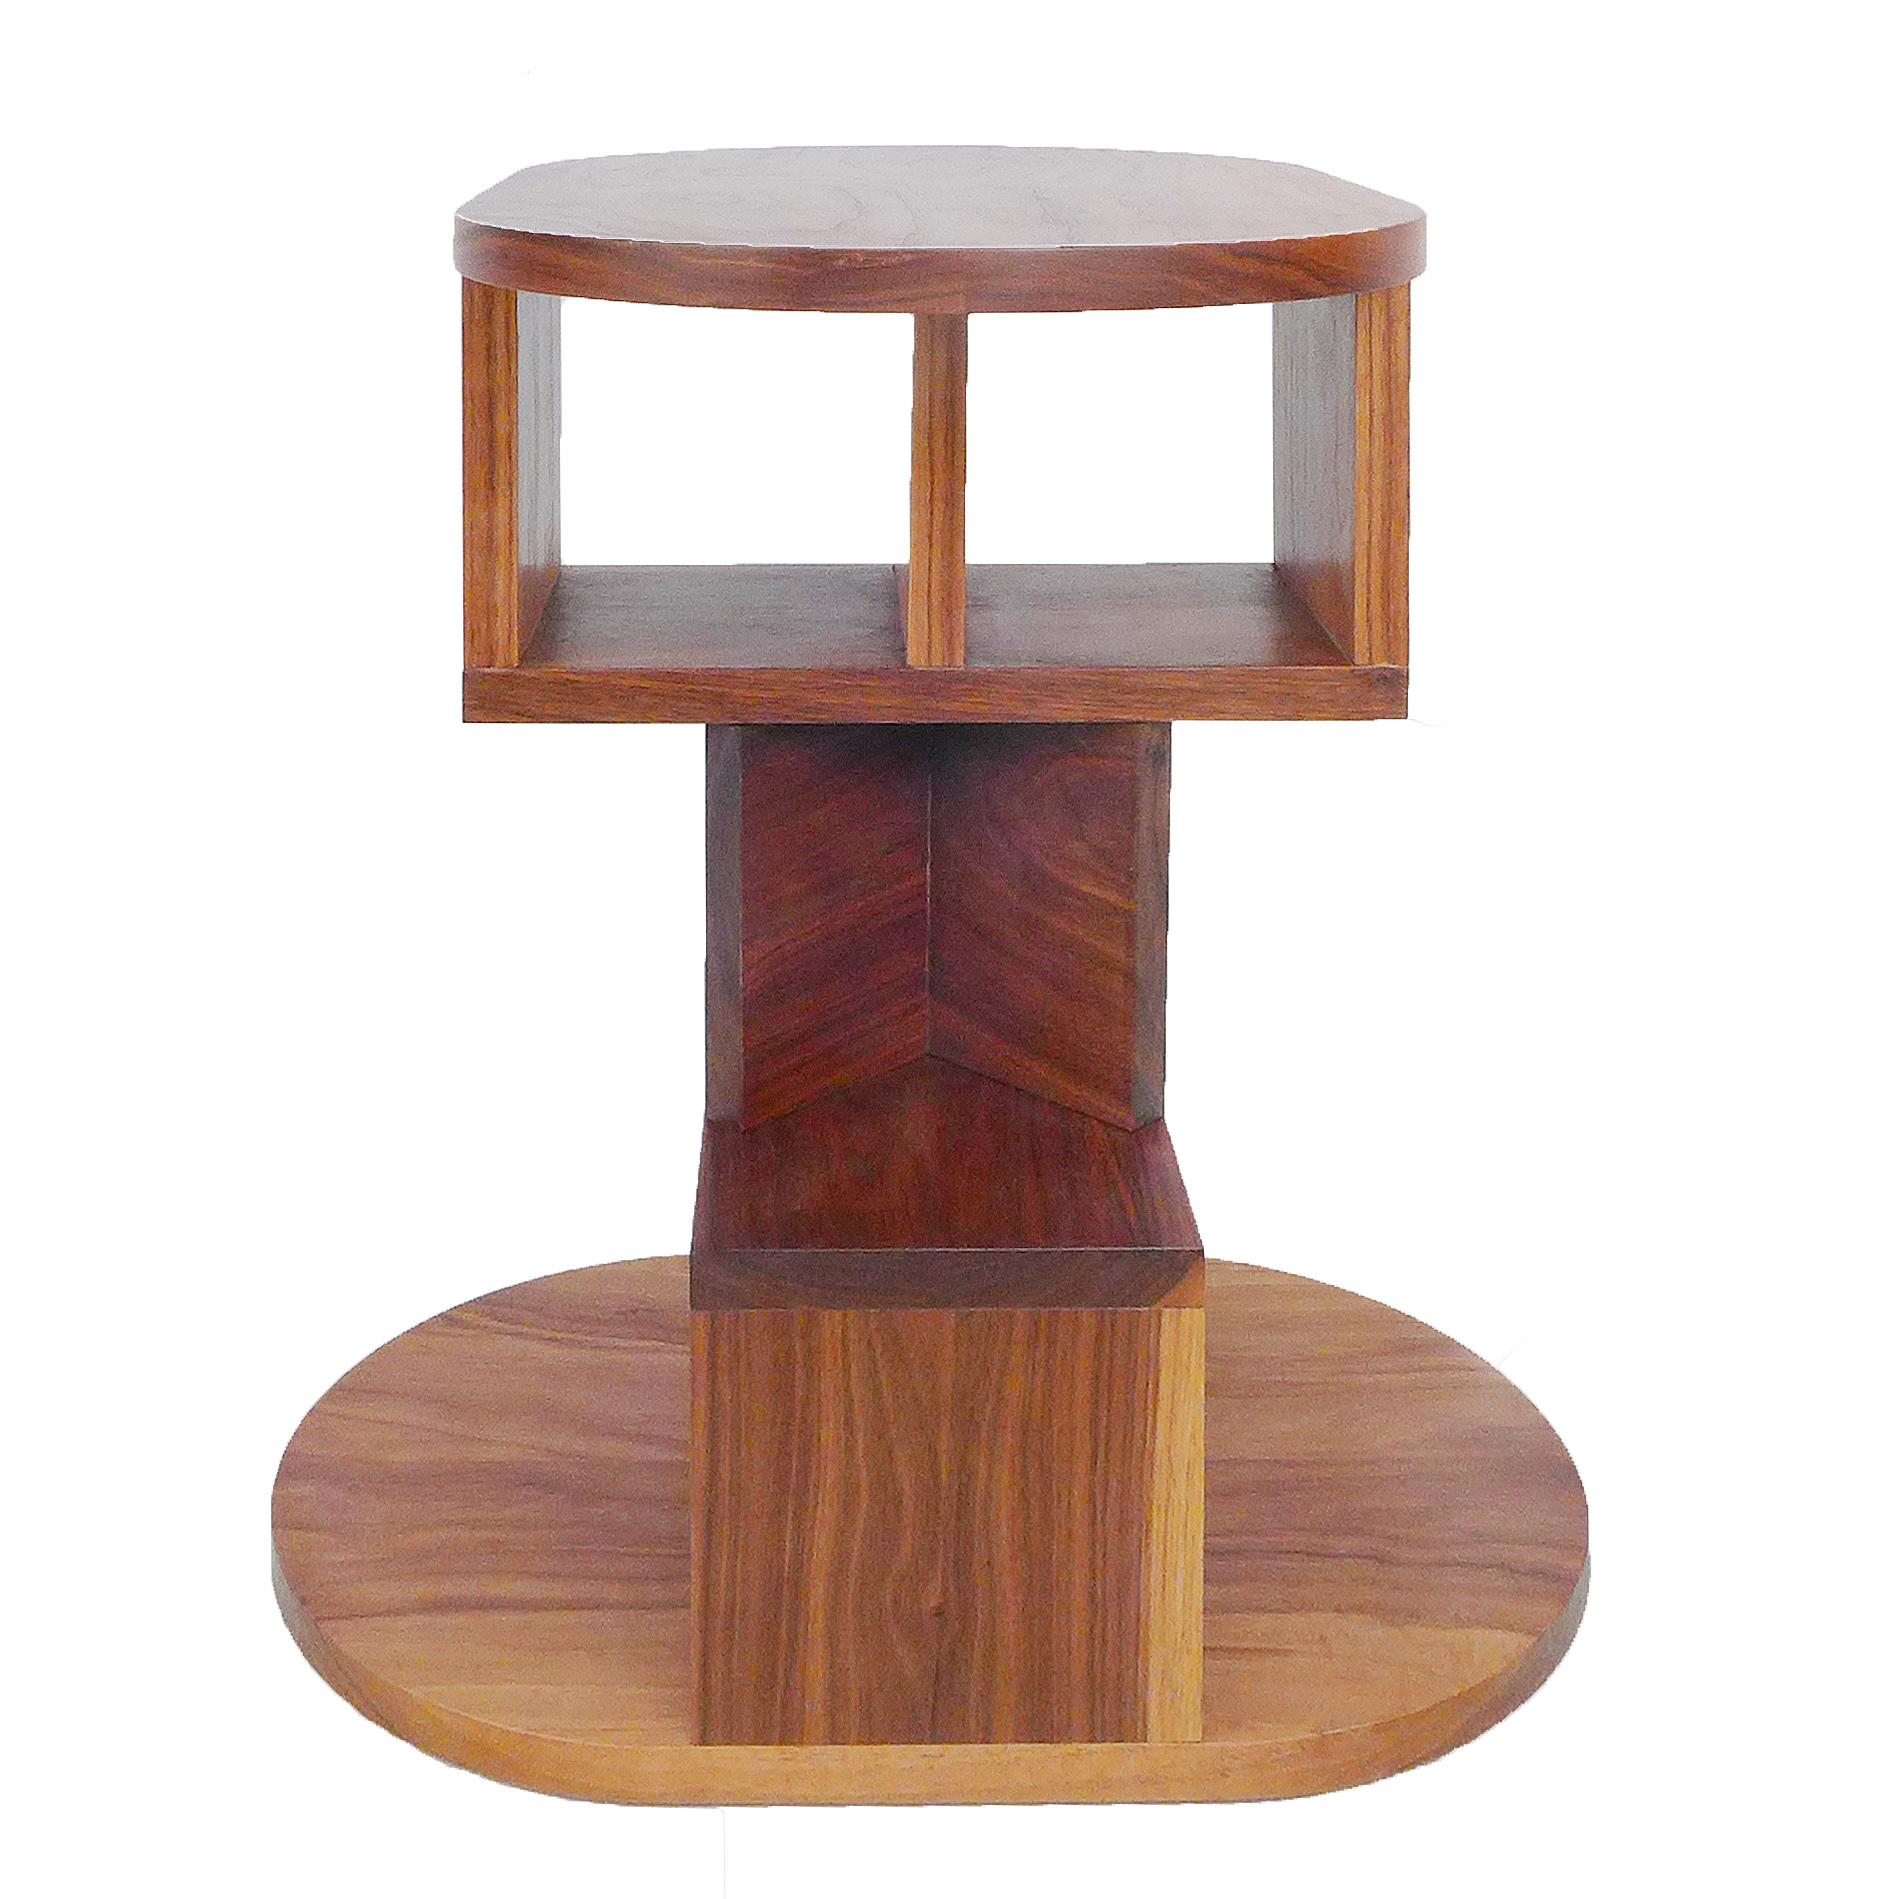 Solid Walnut Double Pyramid Side Table In Excellent Condition For Sale In Amsterdam, NL